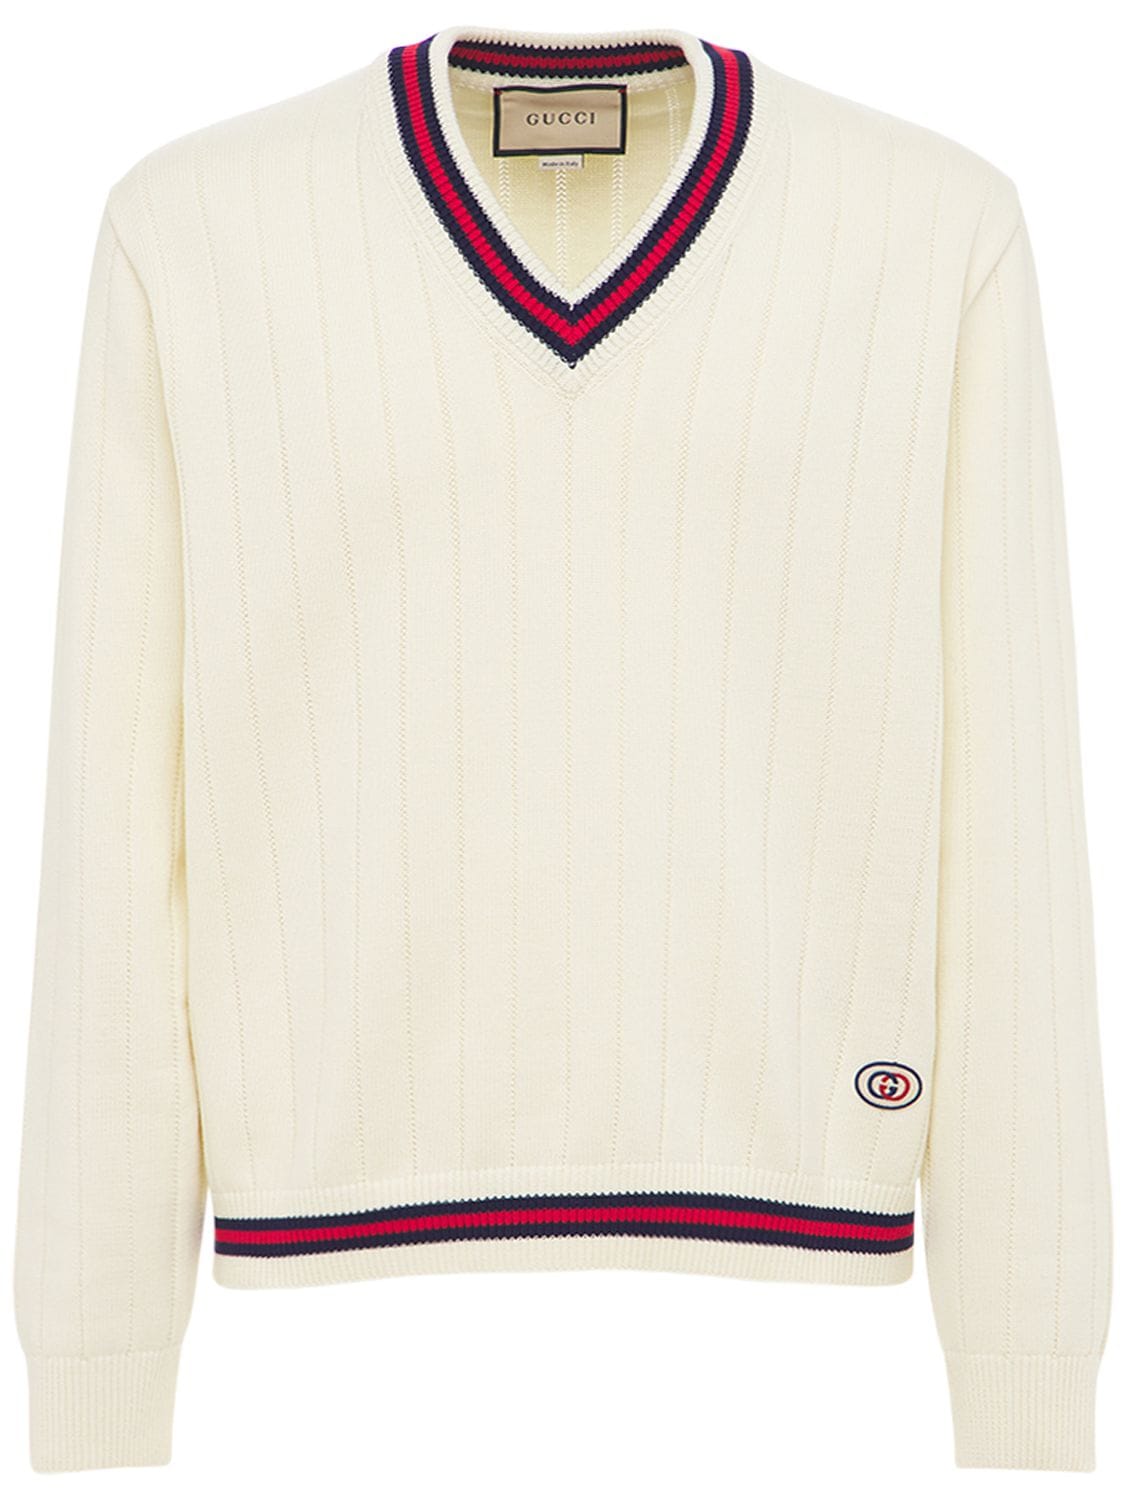 Gucci Cotton Knit V Neck Sweater W/ Web In Ivory